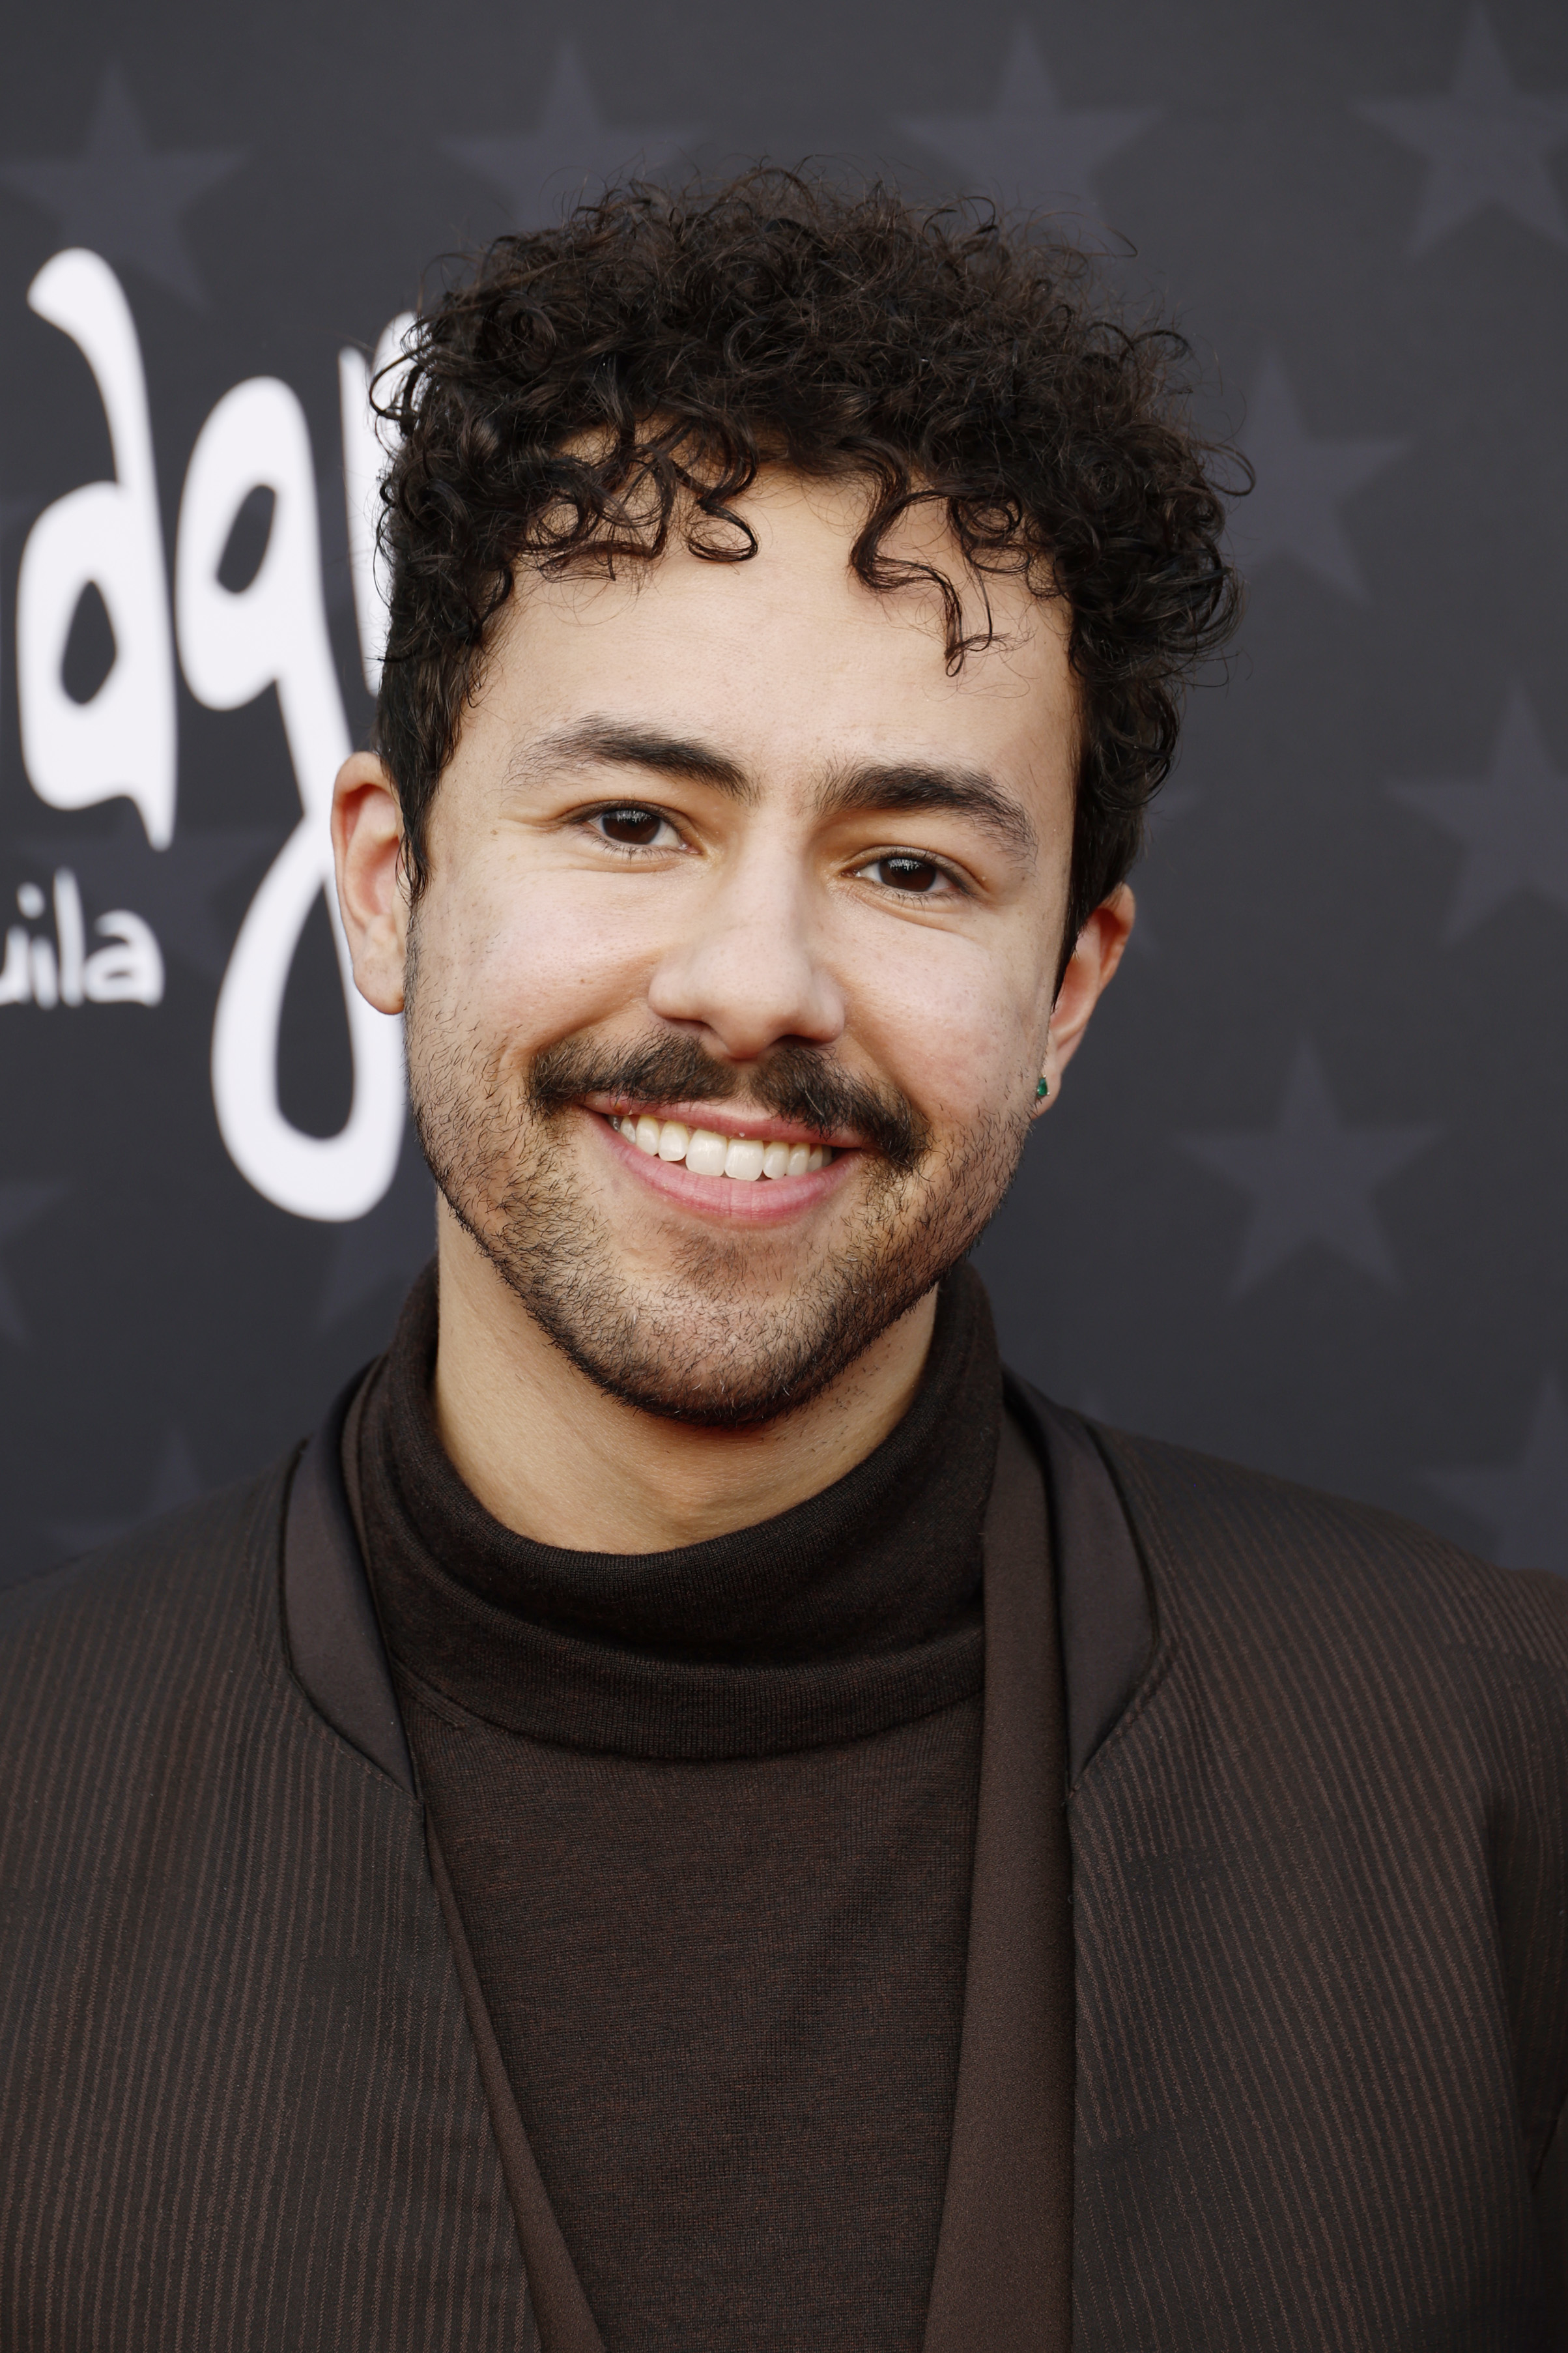 Man with curly hair smiling, wearing a high-neck top and jacket at an event